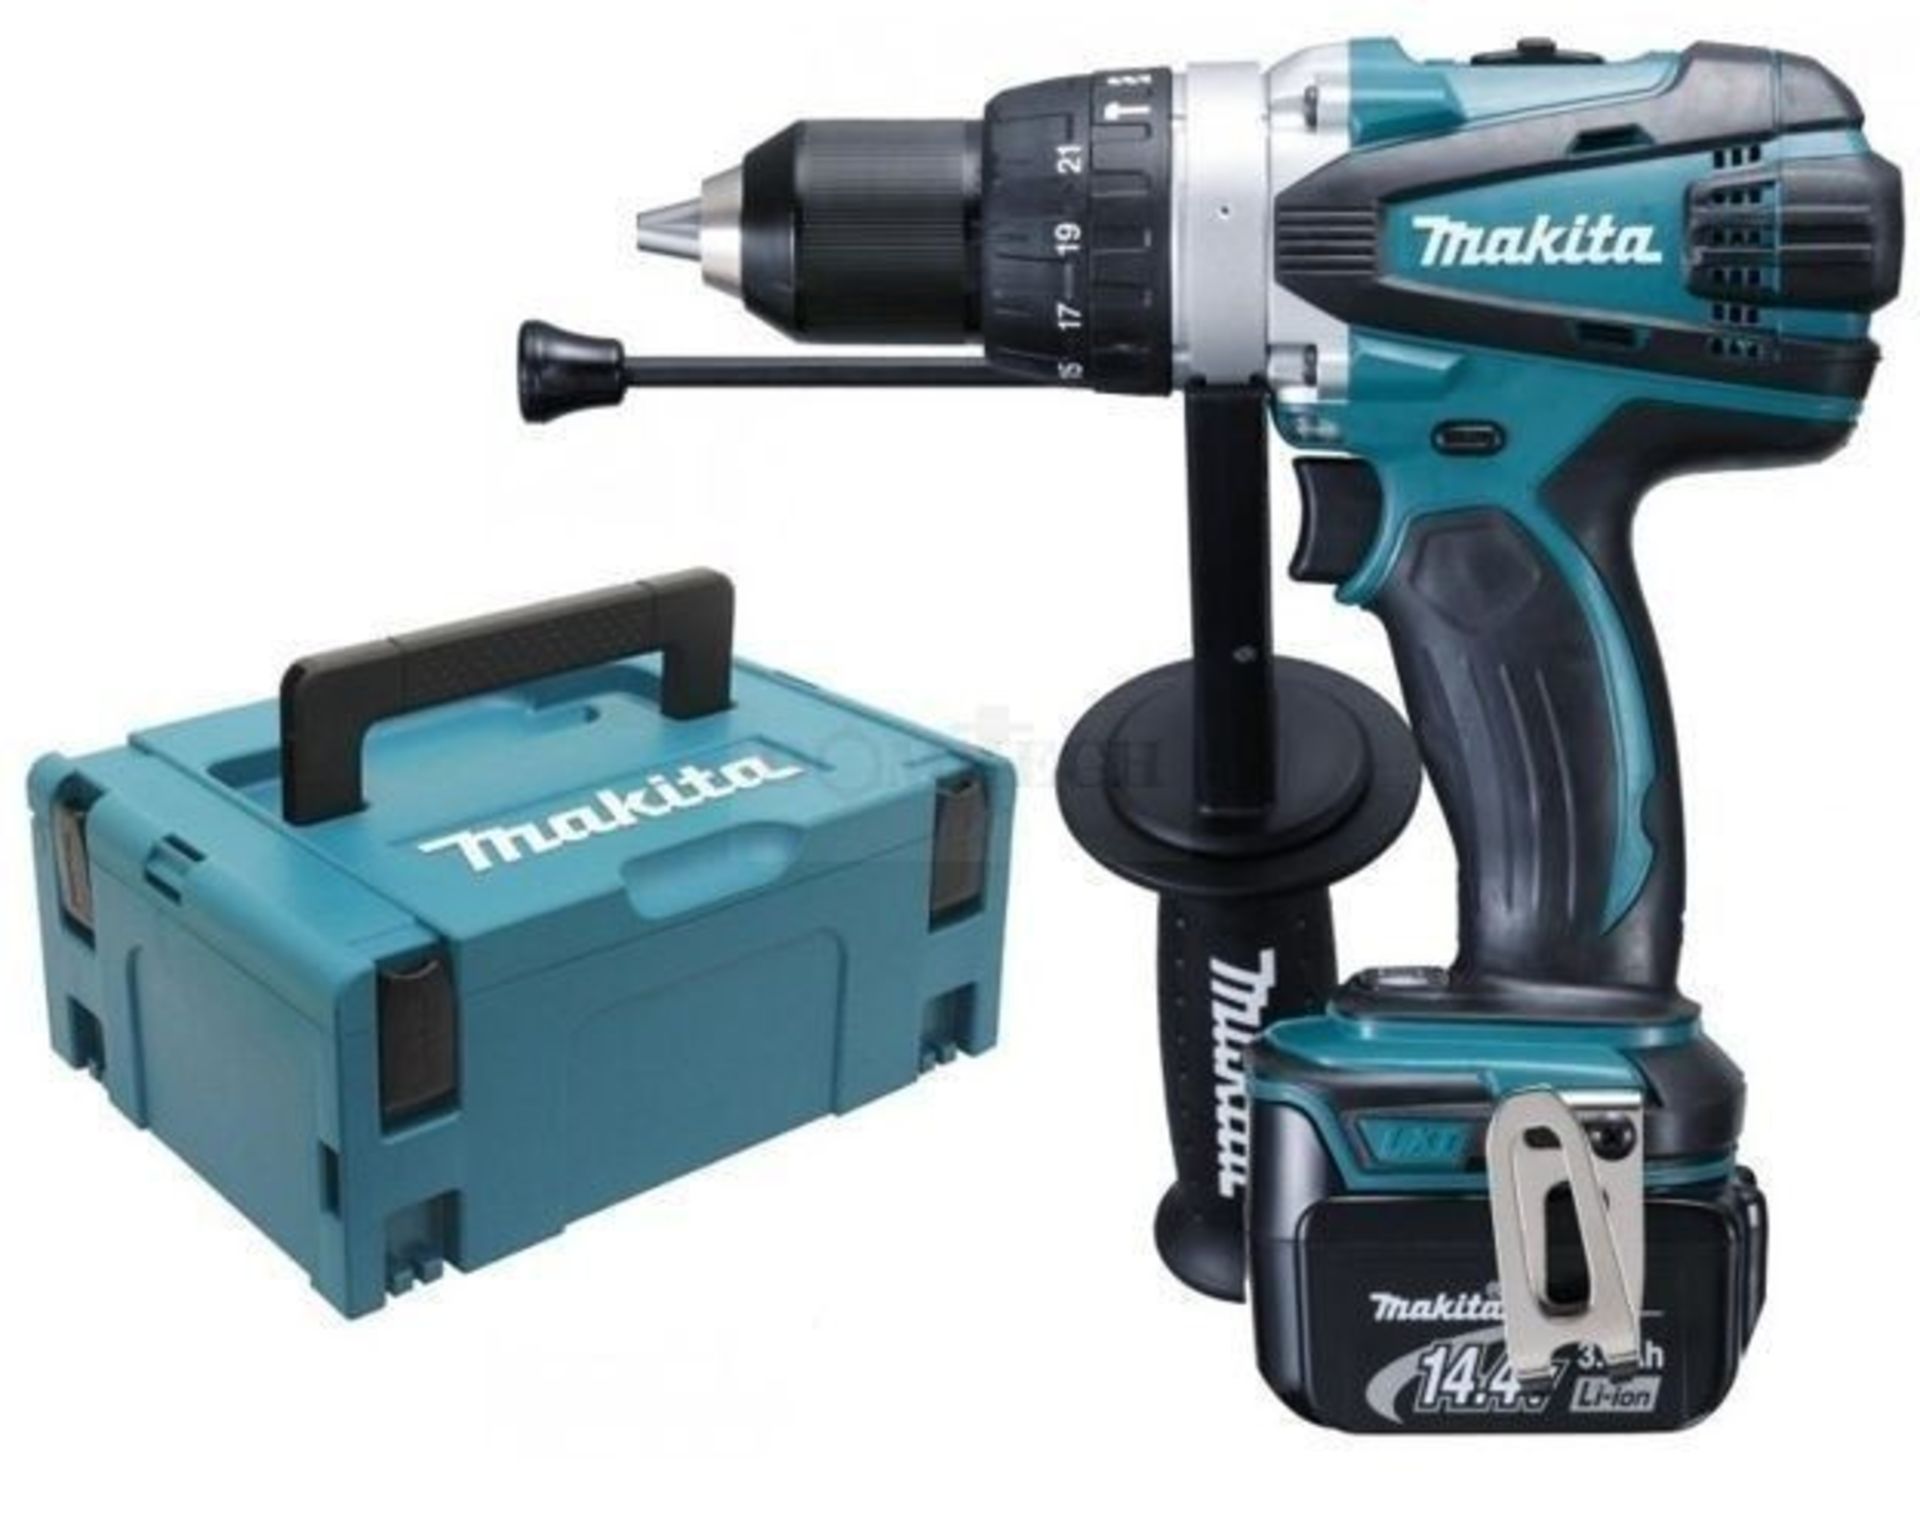 V Brand New Makita 14.4v Hammer Drill With Battery And Hard Case - Online Price £304.80 (Domitech)